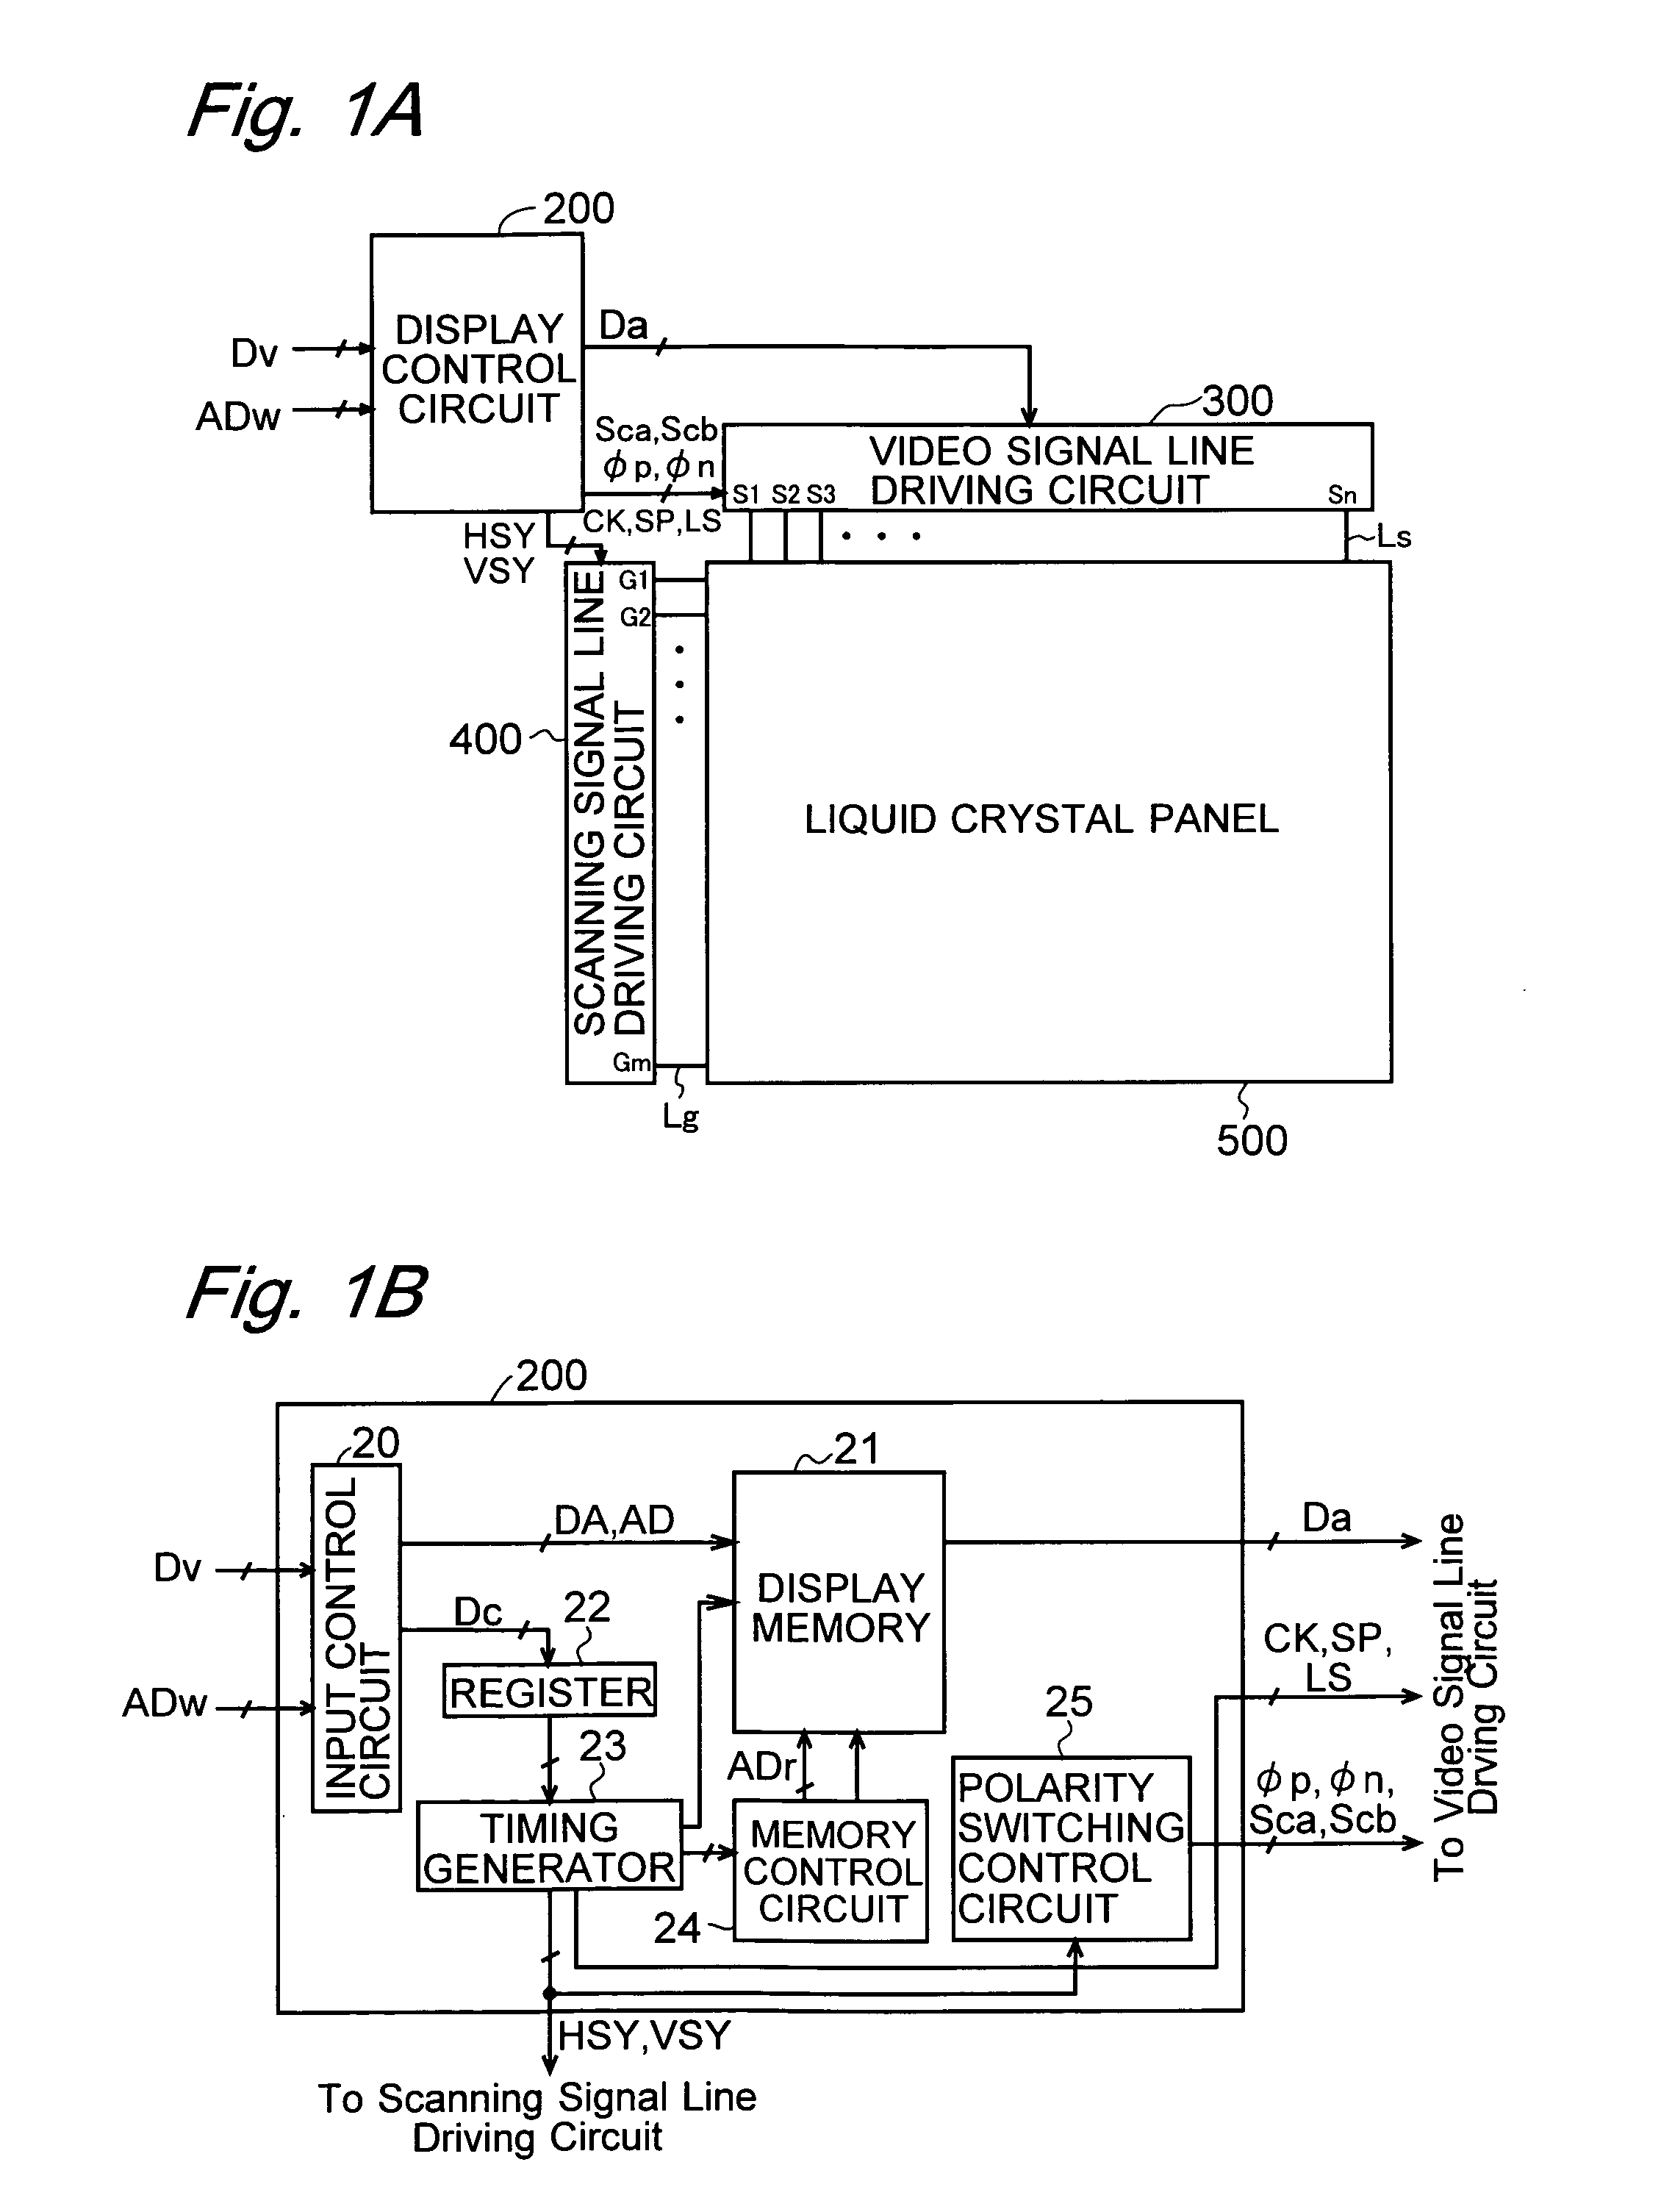 Circuit and method for driving a capacitive load, and display device provided with a circuit for driving a capacitive load